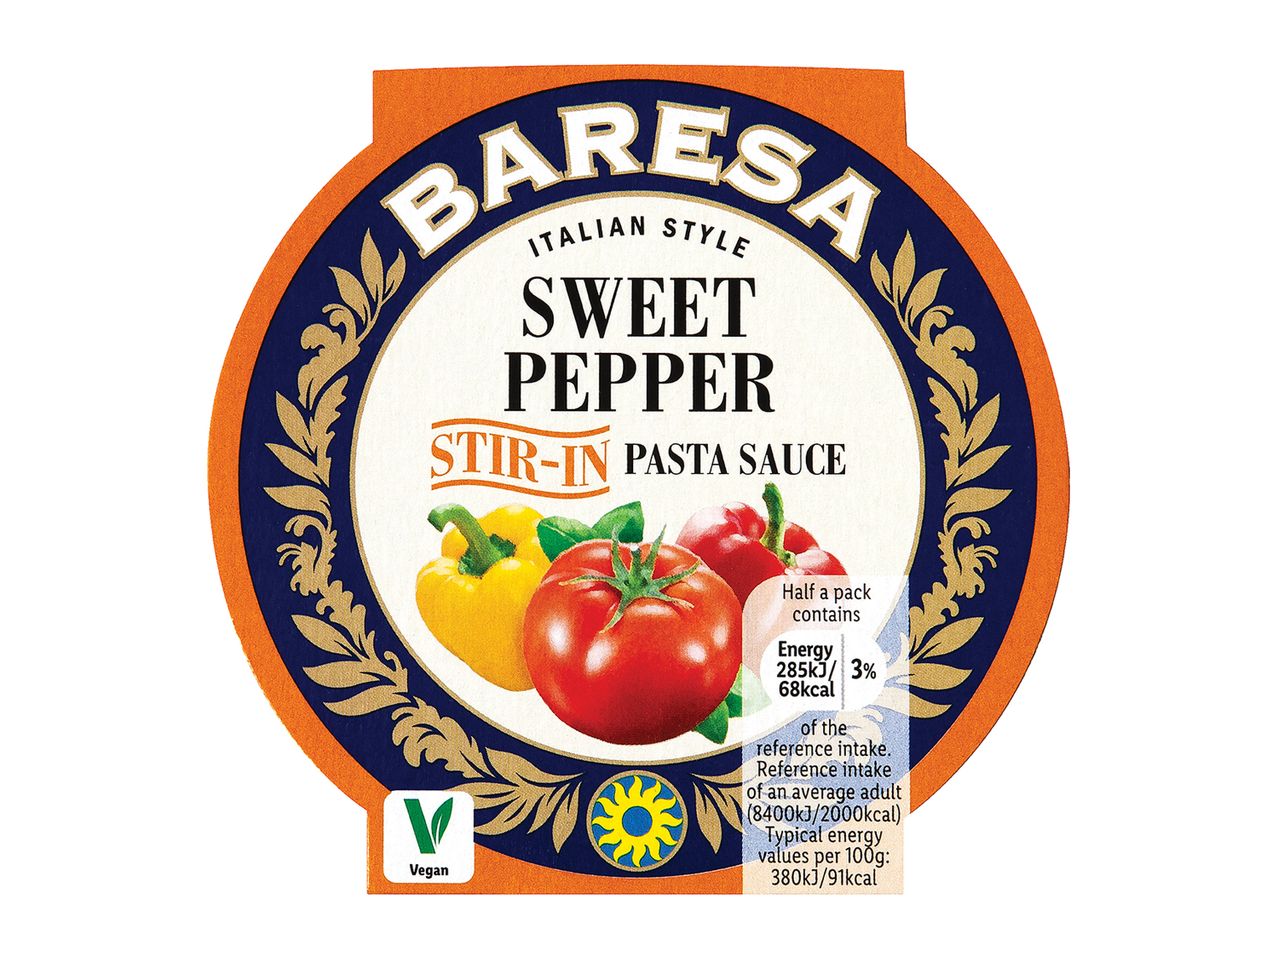 Go to full screen view: Baresa Stir In Pasta Sauces Assorted Flavours - Image 2